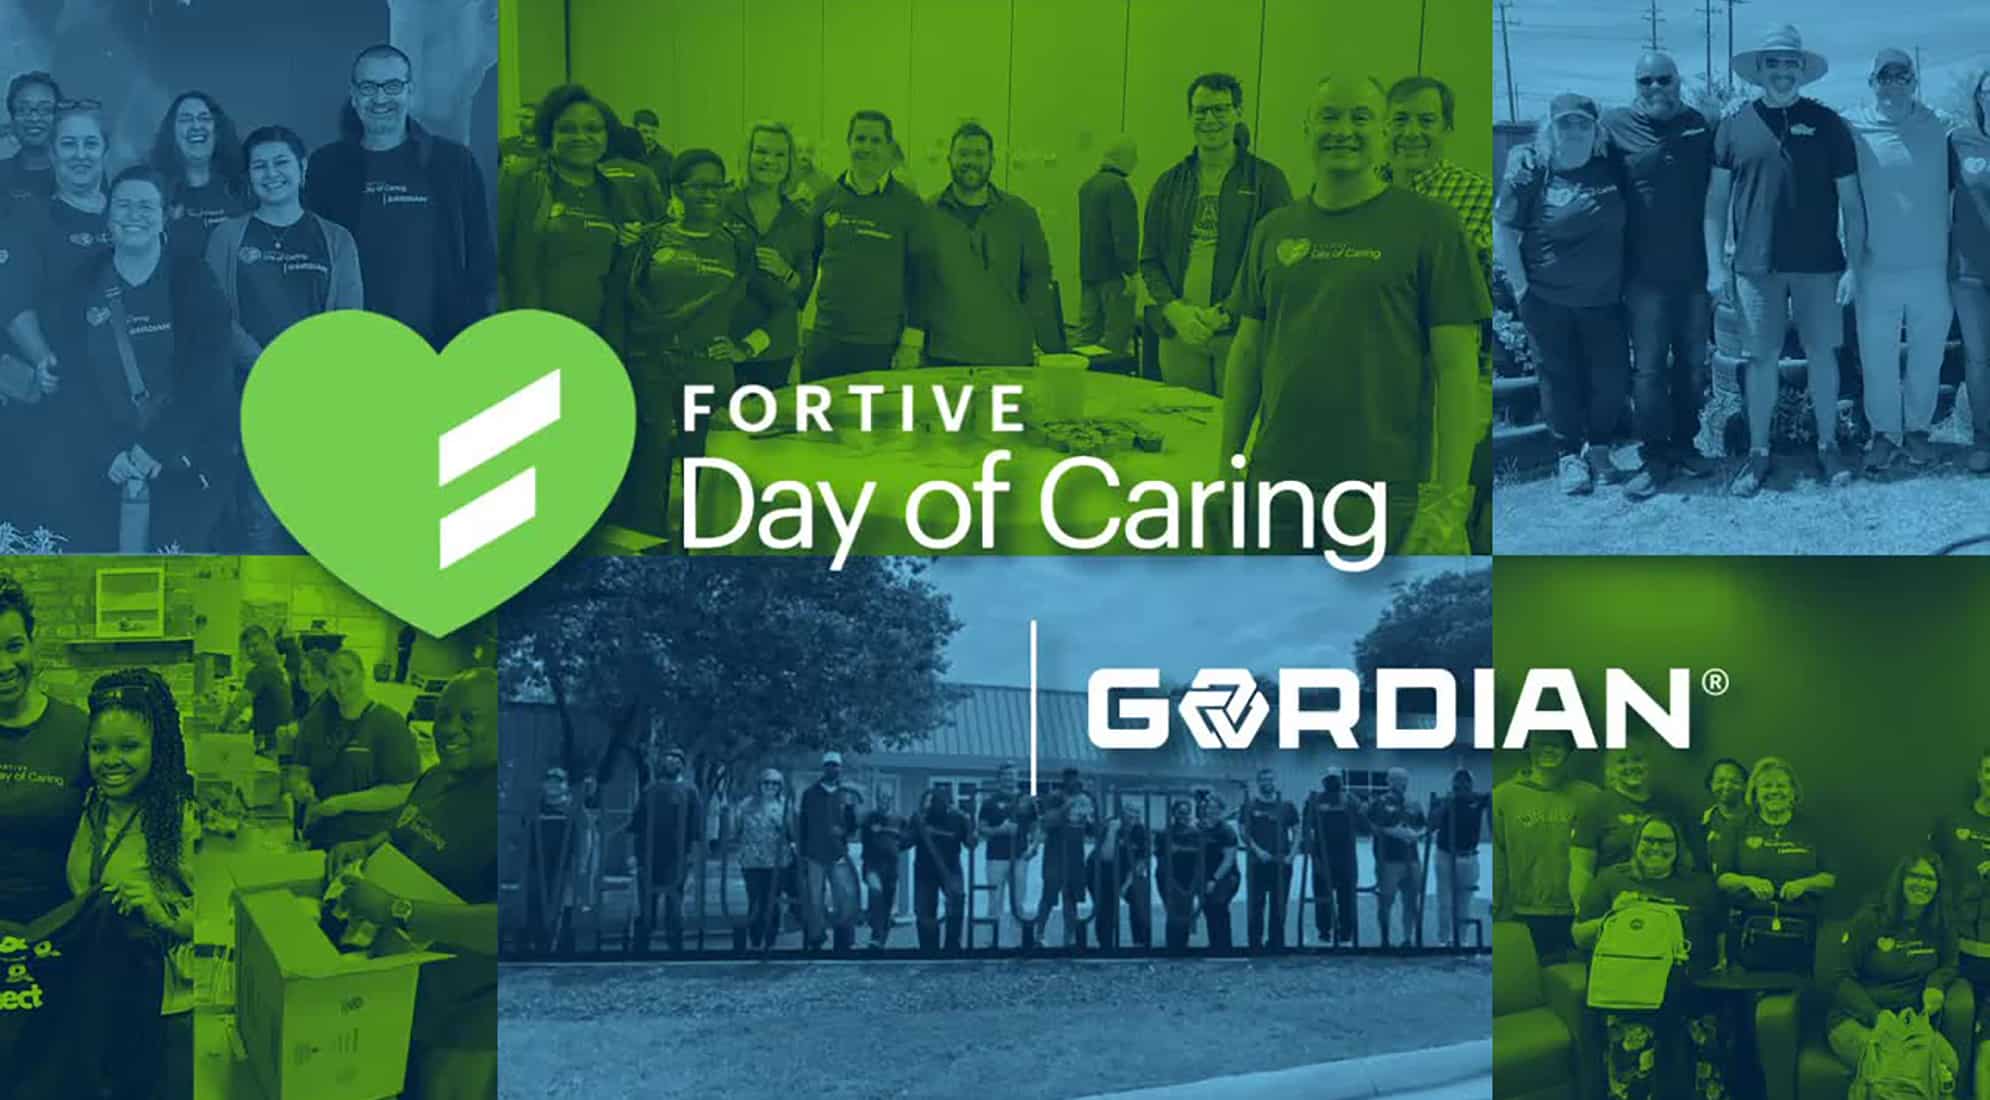 Gordian Gives Throughout 2023 Fortive Day of Caring